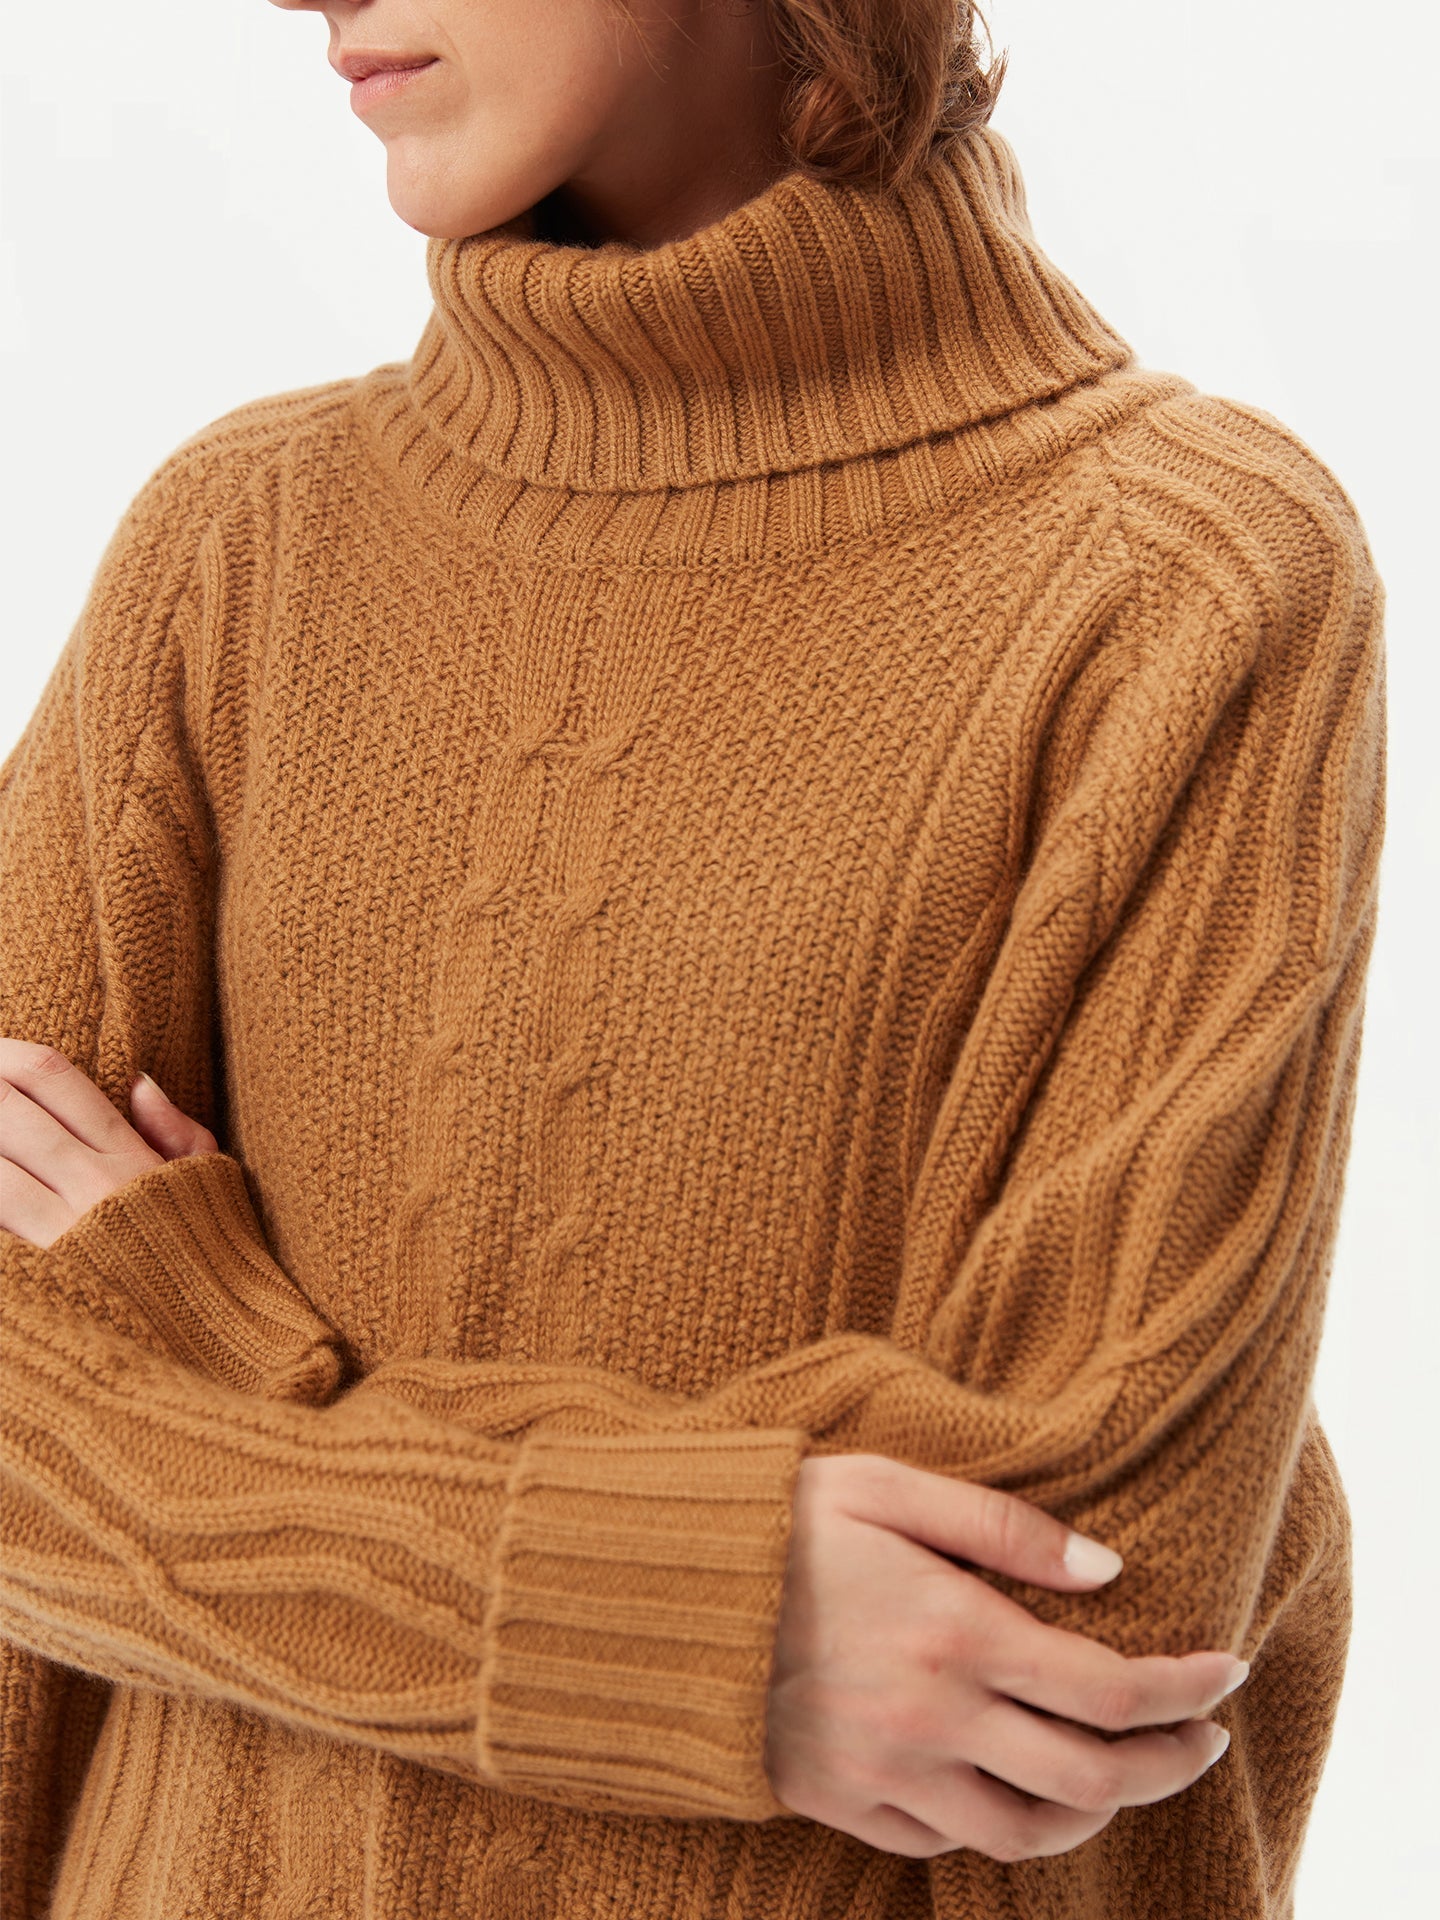 These 24 Cozy Knit Sweaters Will Make You Feel Snug As A Bug This